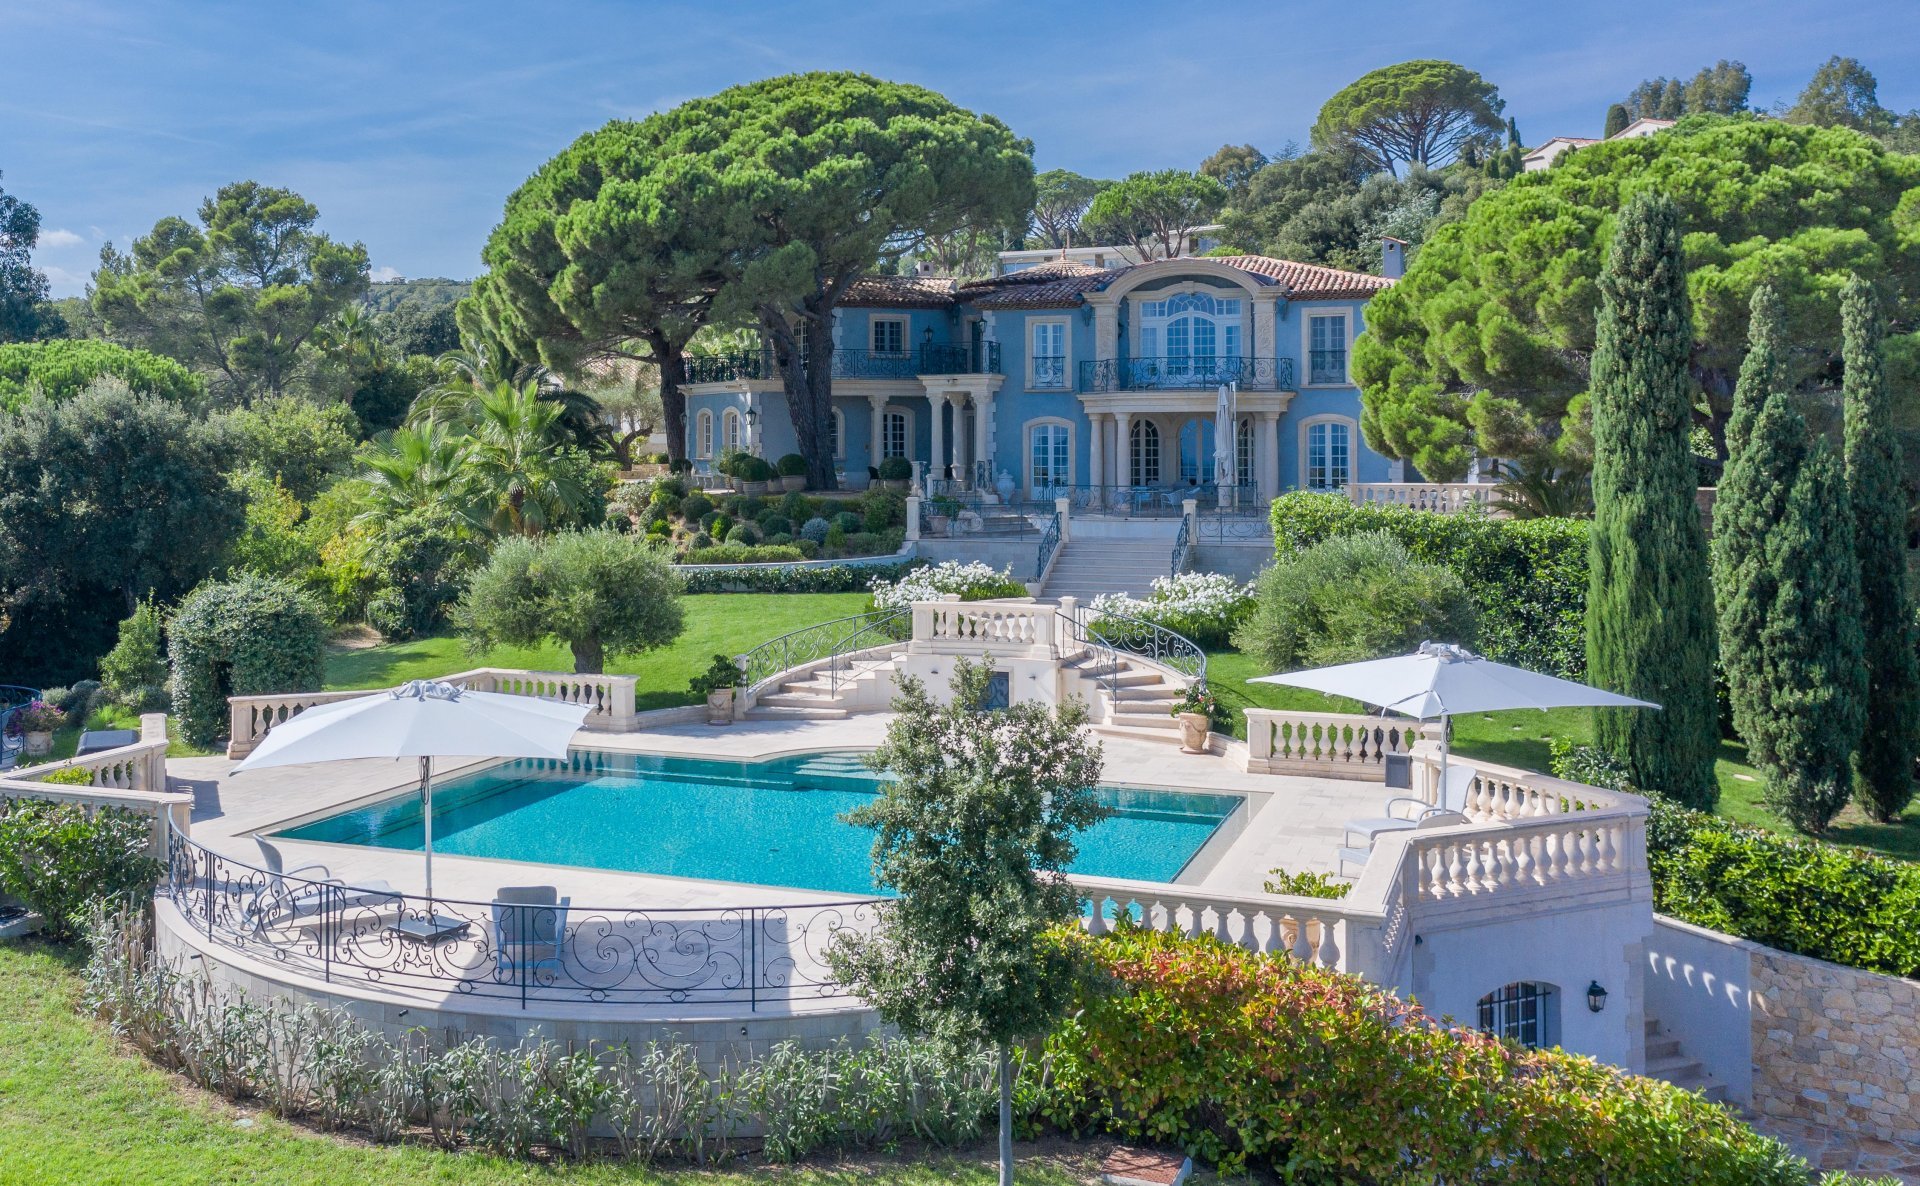 Francis York Iconic French Riviera Villa Overlooking the Bay of Saint Tropez 2.jpg